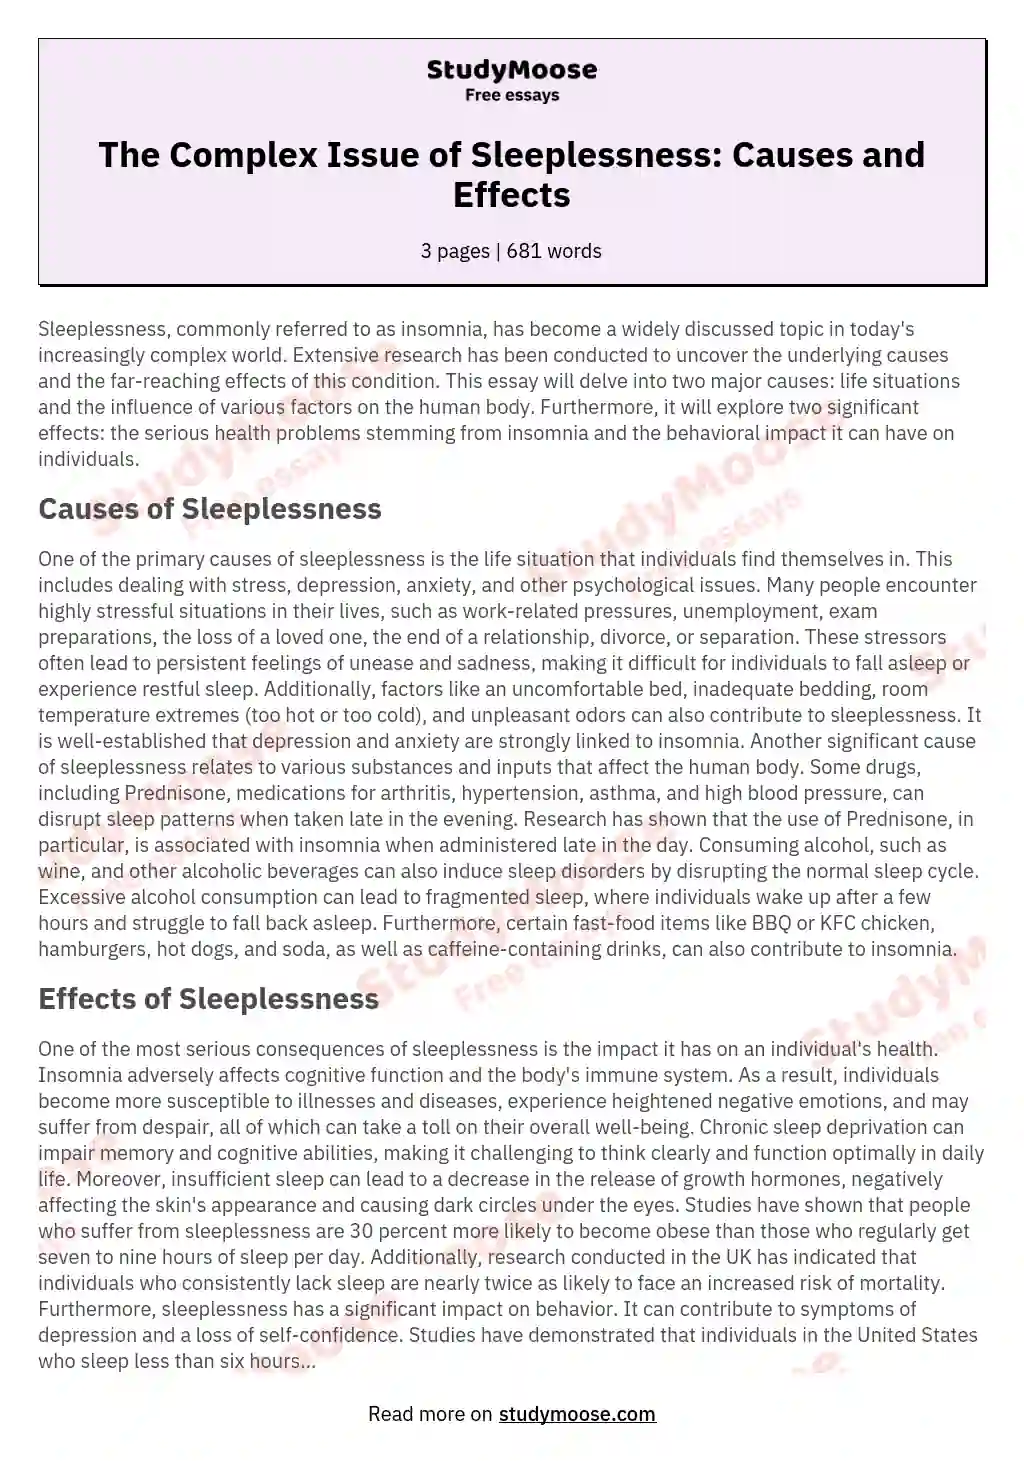 The Complex Issue of Sleeplessness: Causes and Effects essay